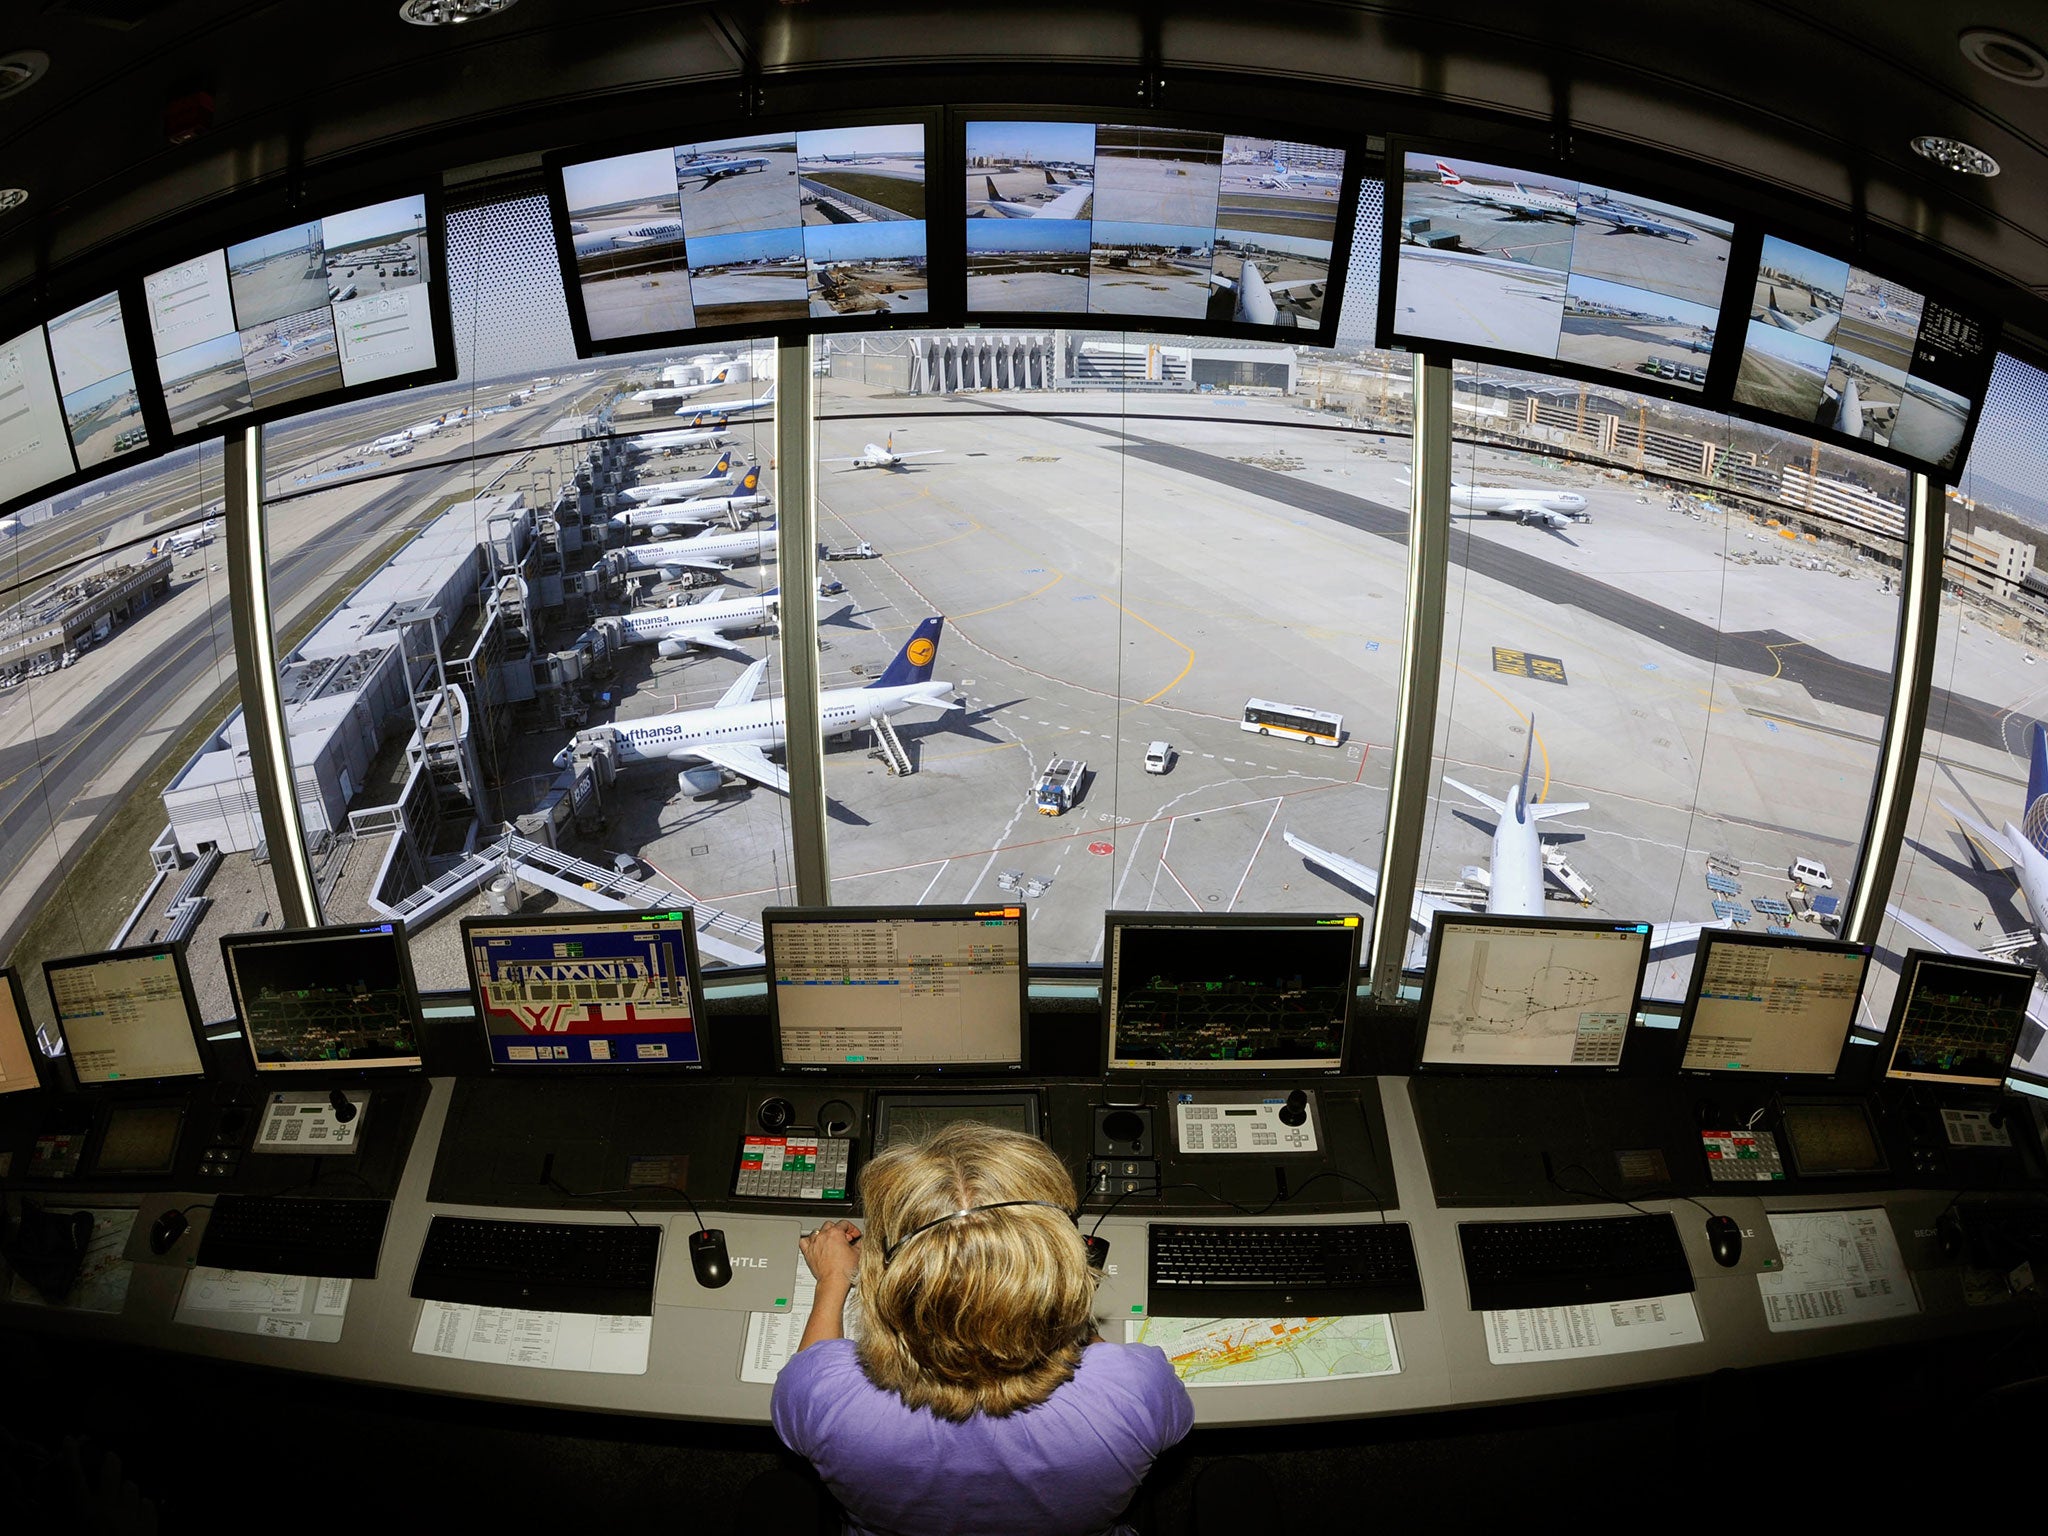 Air traffic controllers came third in the list